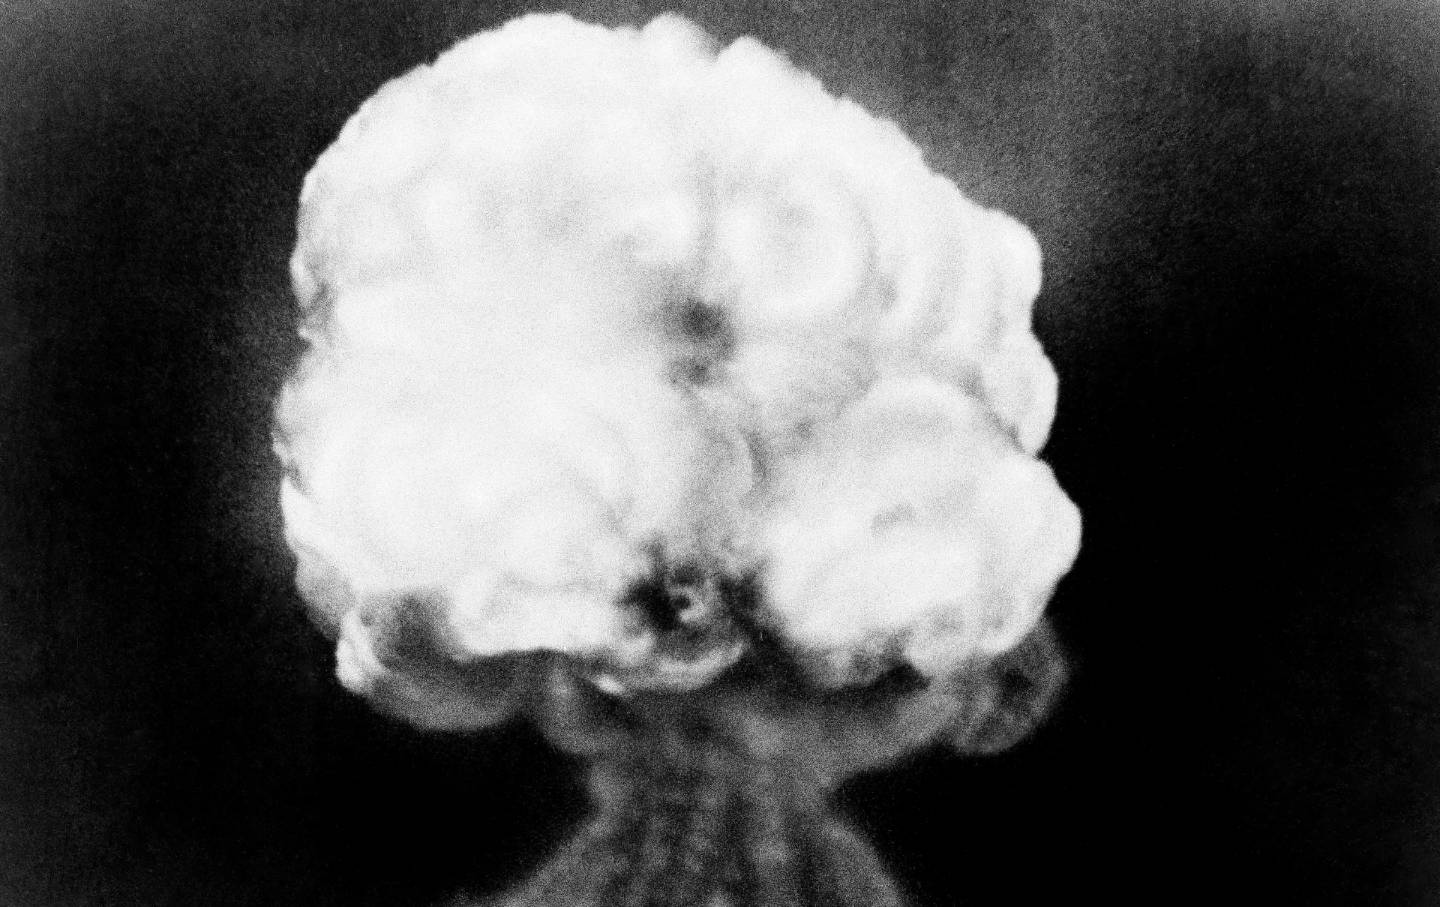 A black-and-white photo with a mushroom-shaped explosion.